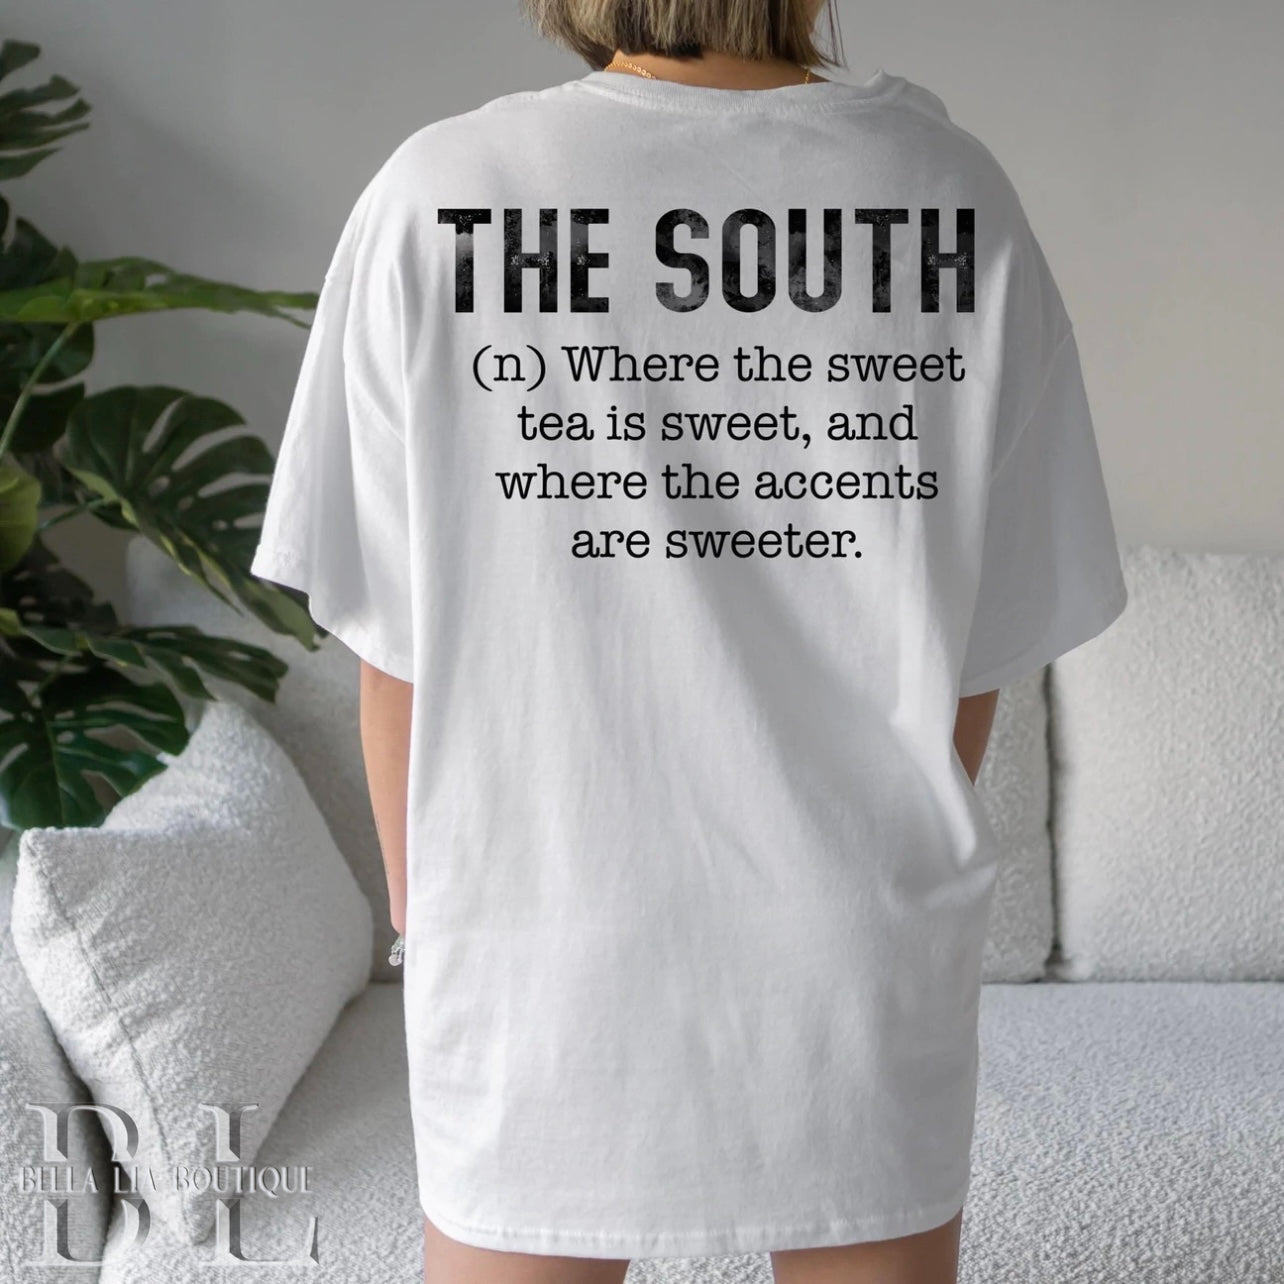 The South Graphic Tee or Sweatshirt - Bella Lia Boutique